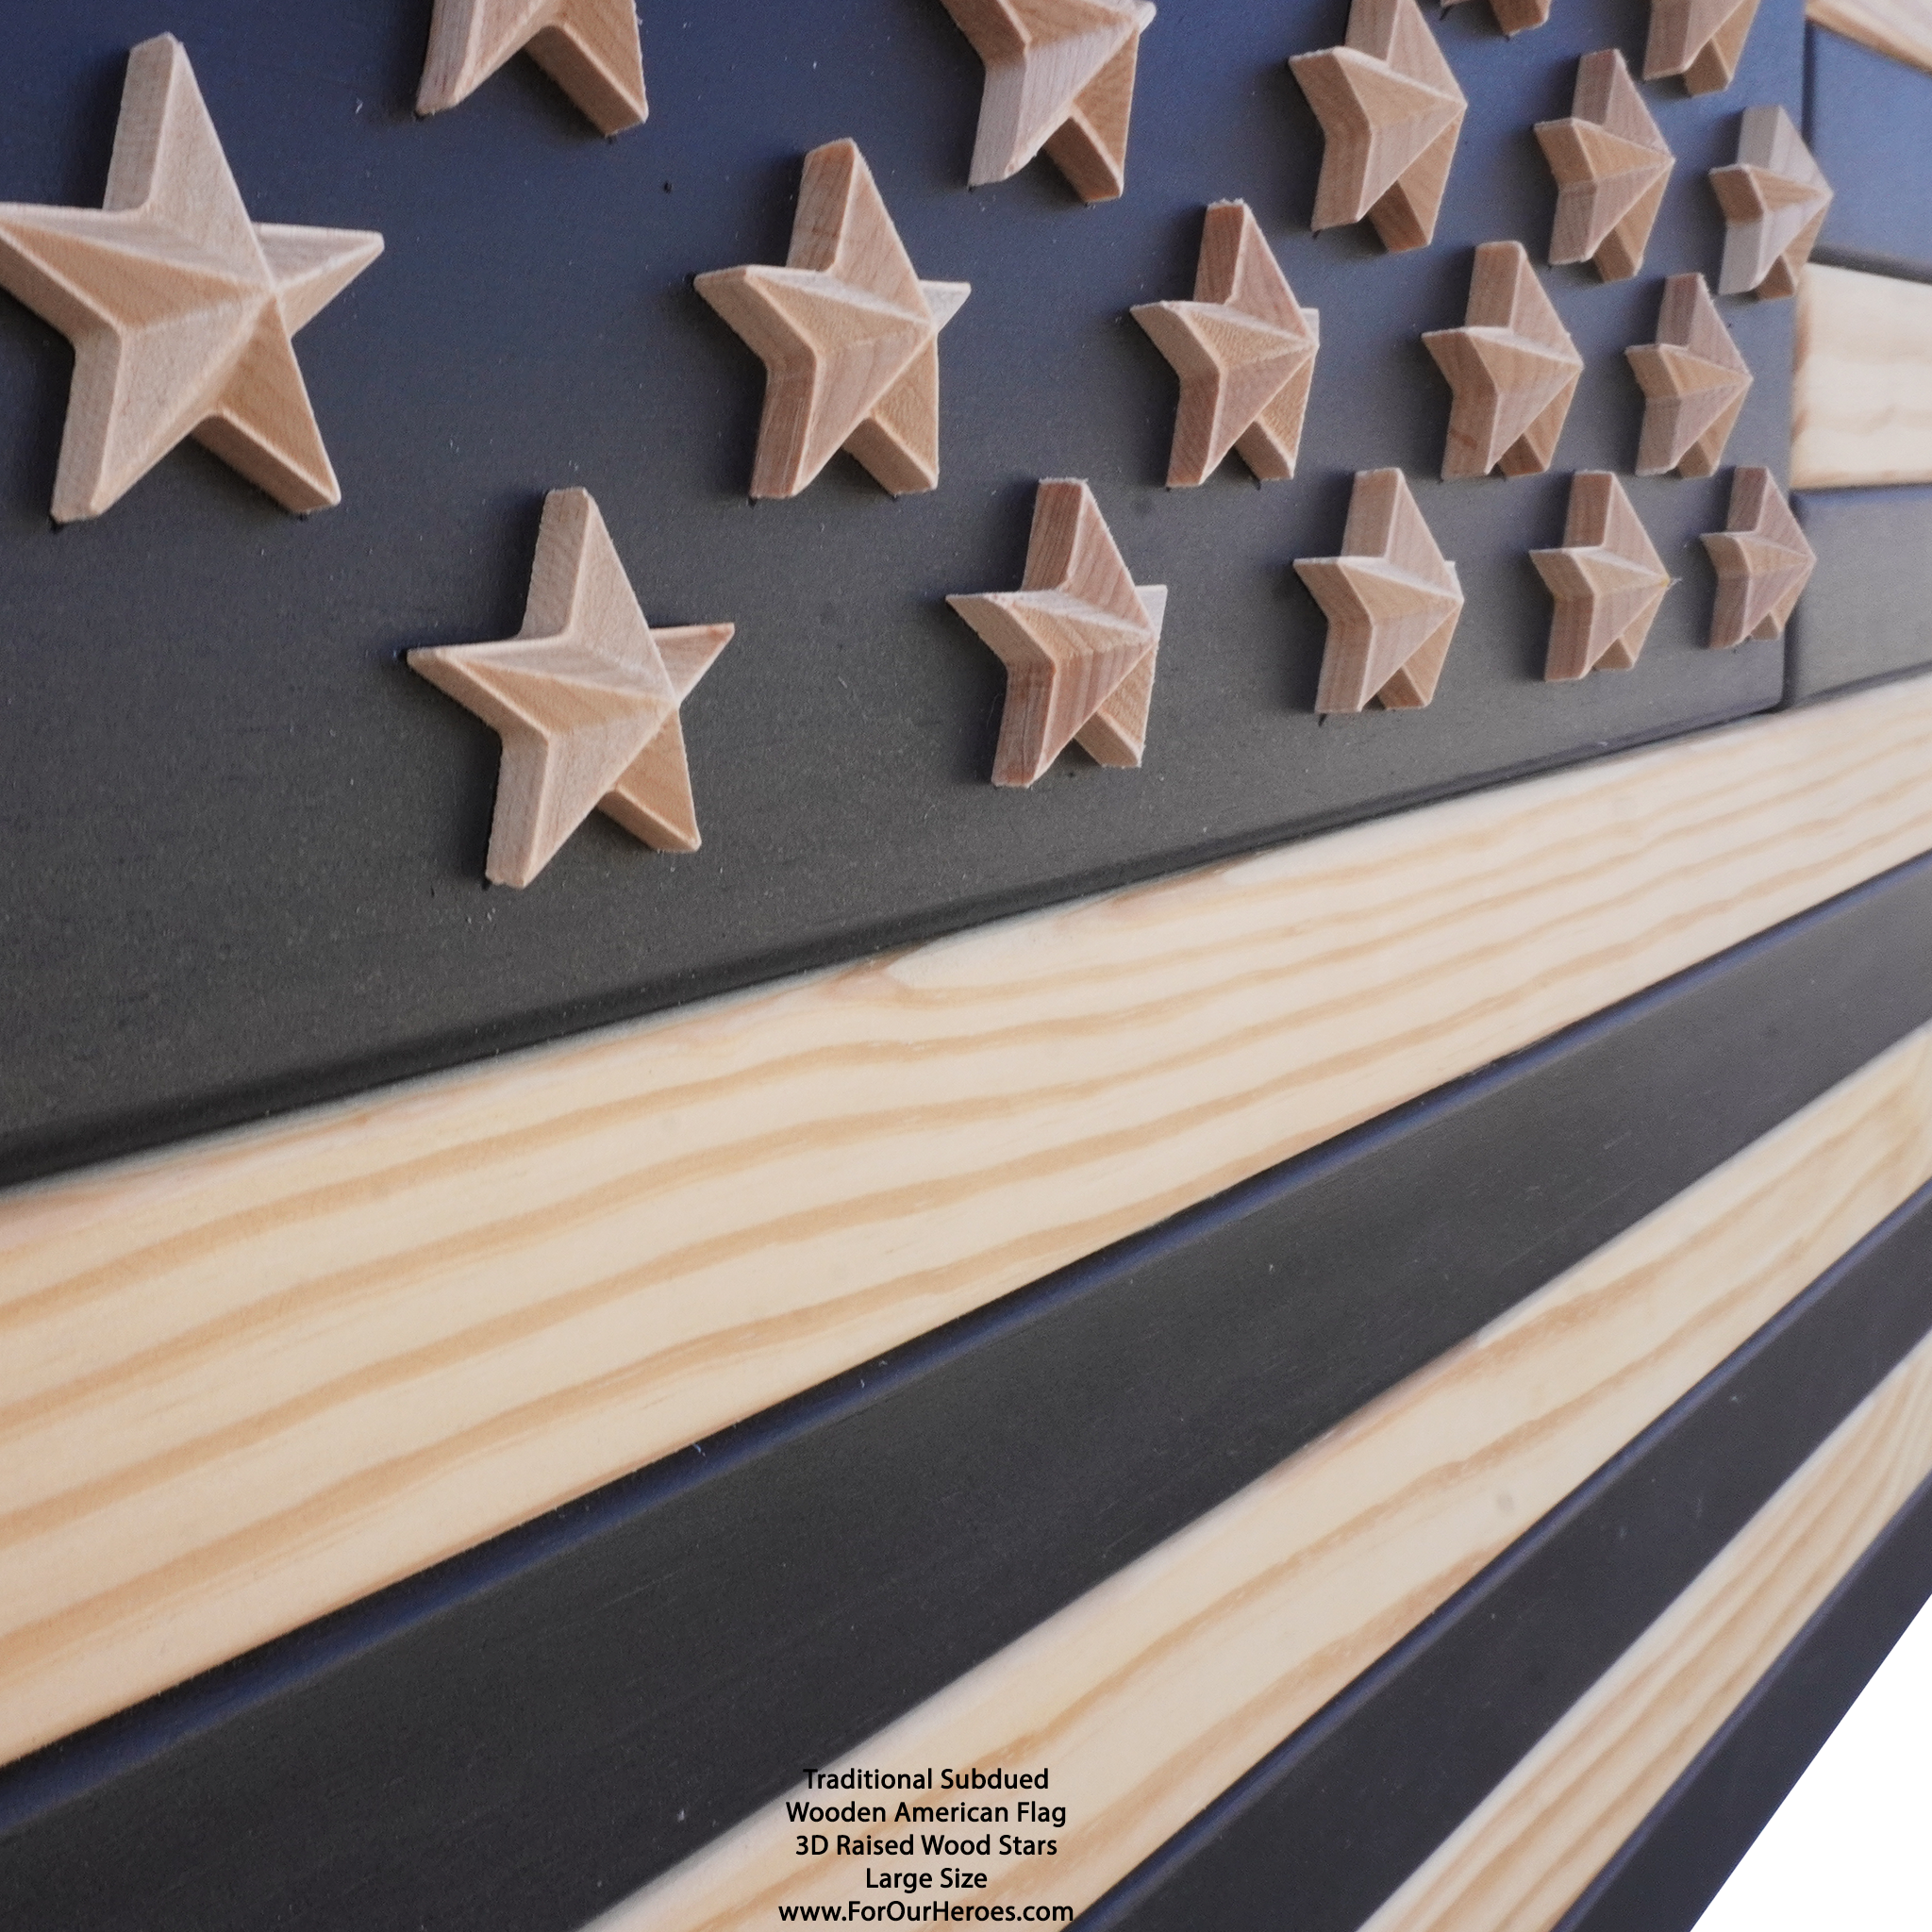 2D TRADITIONAL SUBDUED American Flag (TRUE 3D Raised Stars)